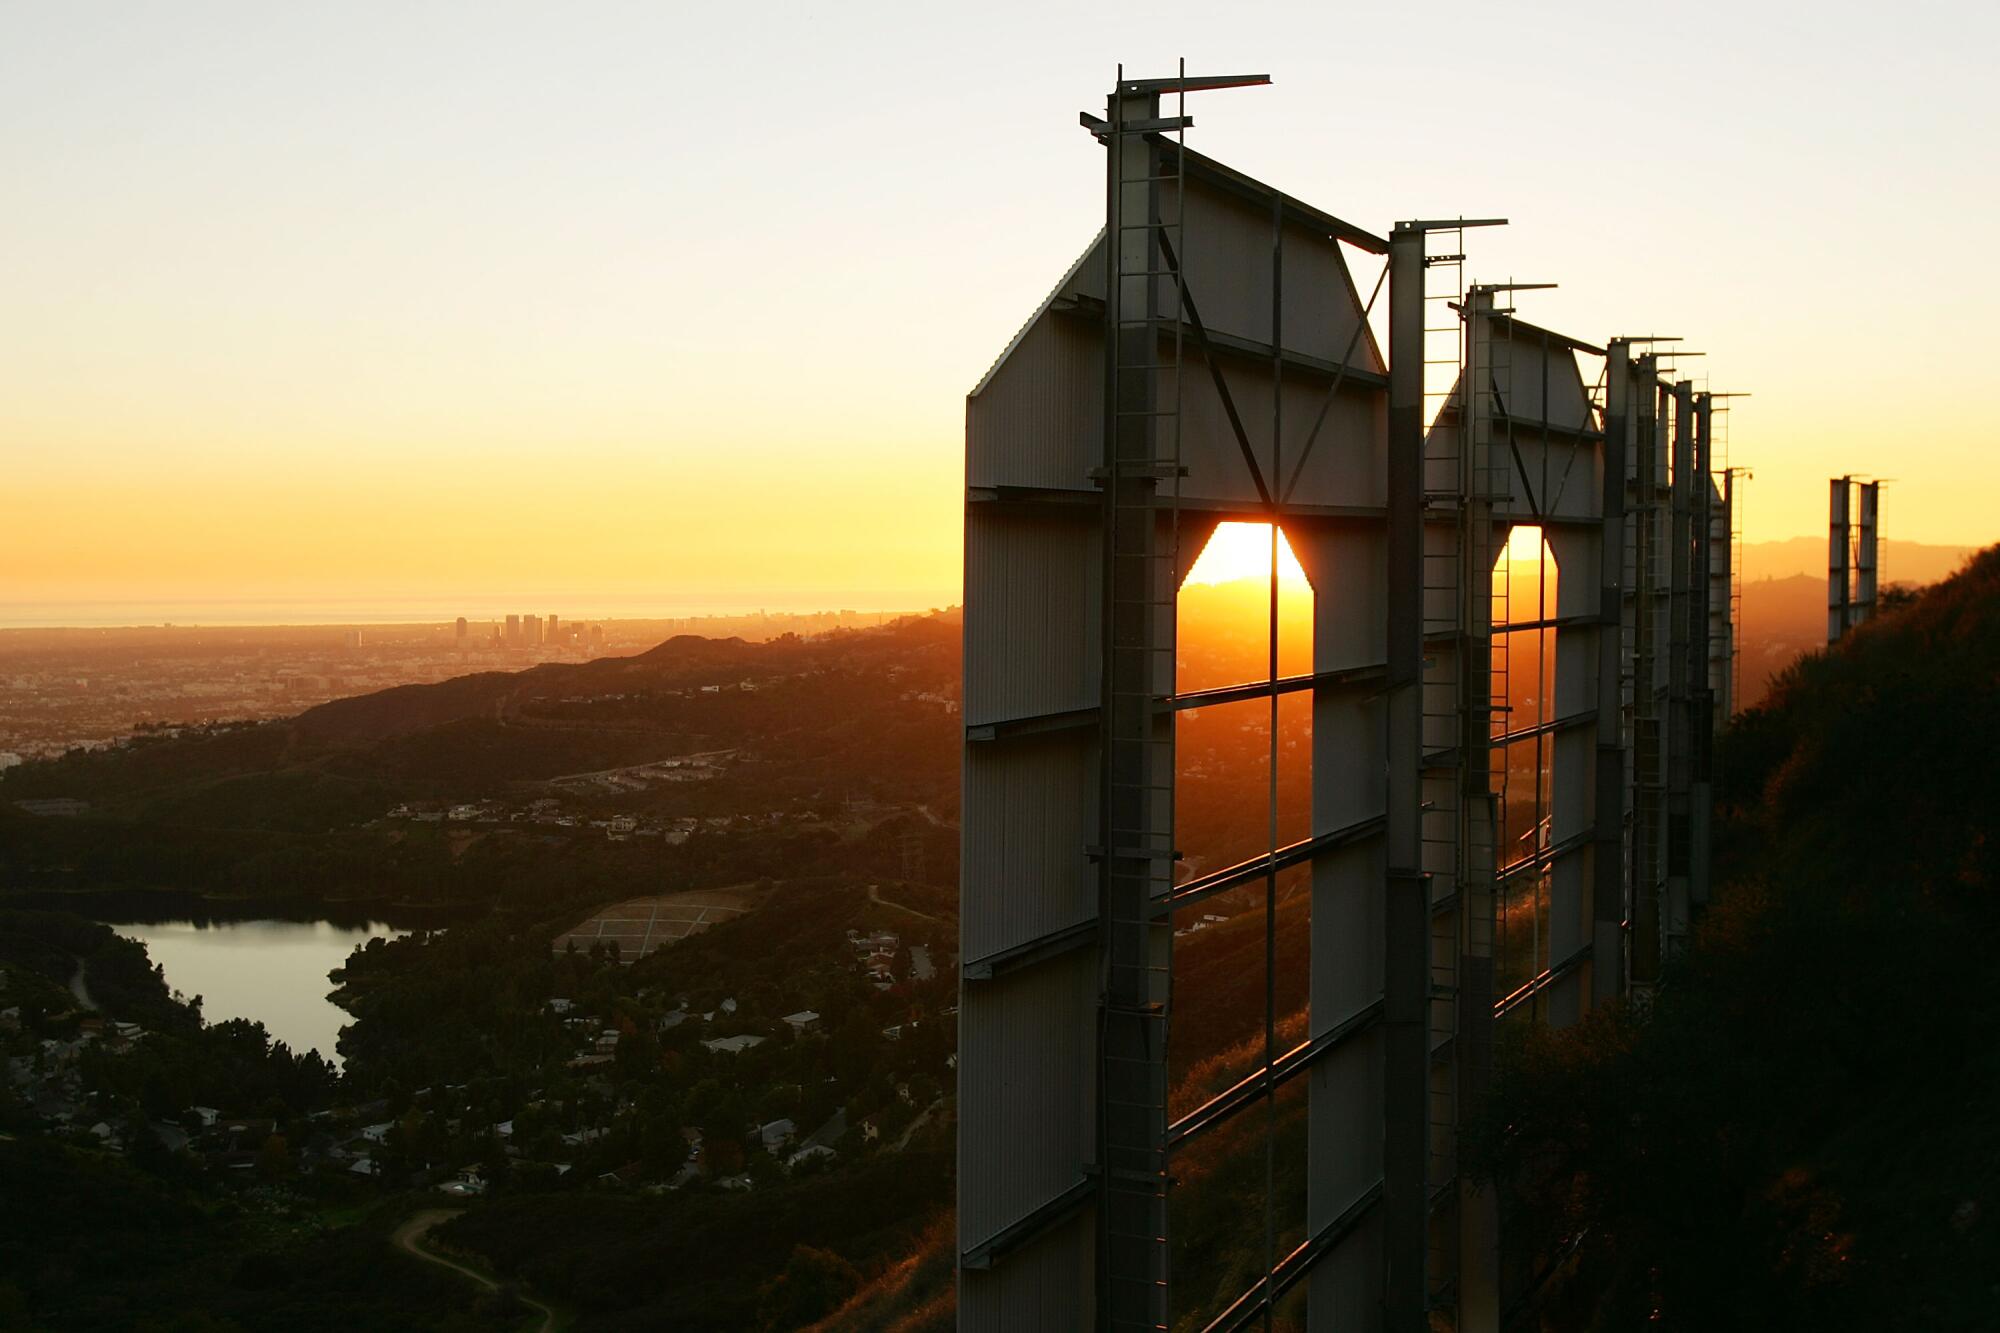 A view behind the two O's in the Hollywood sign as the sun sets in the distance